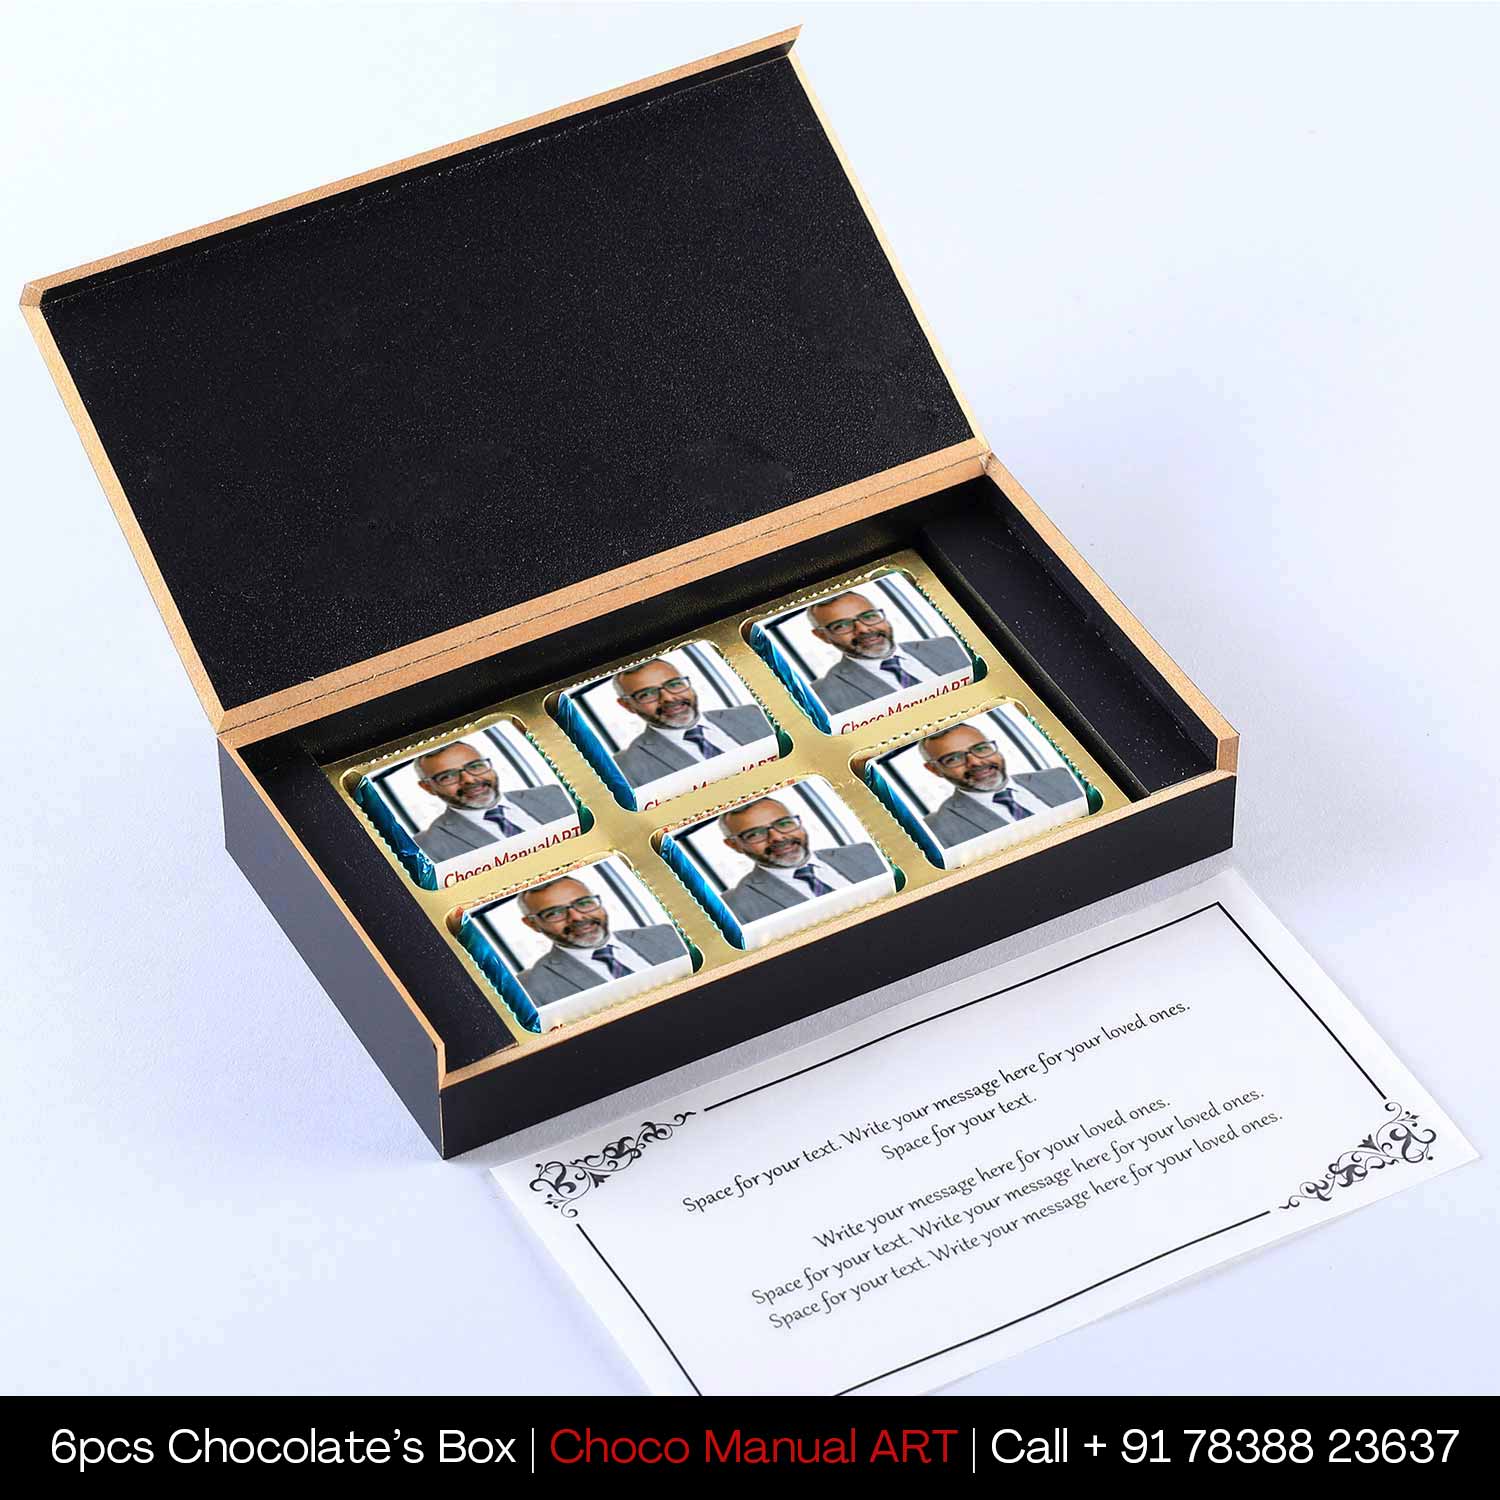 Thank you gifts for colleagues I  Image/Name printed chocolate box I  Delicious chocolates I  Free shipping across India I  Elegant wooden packaging